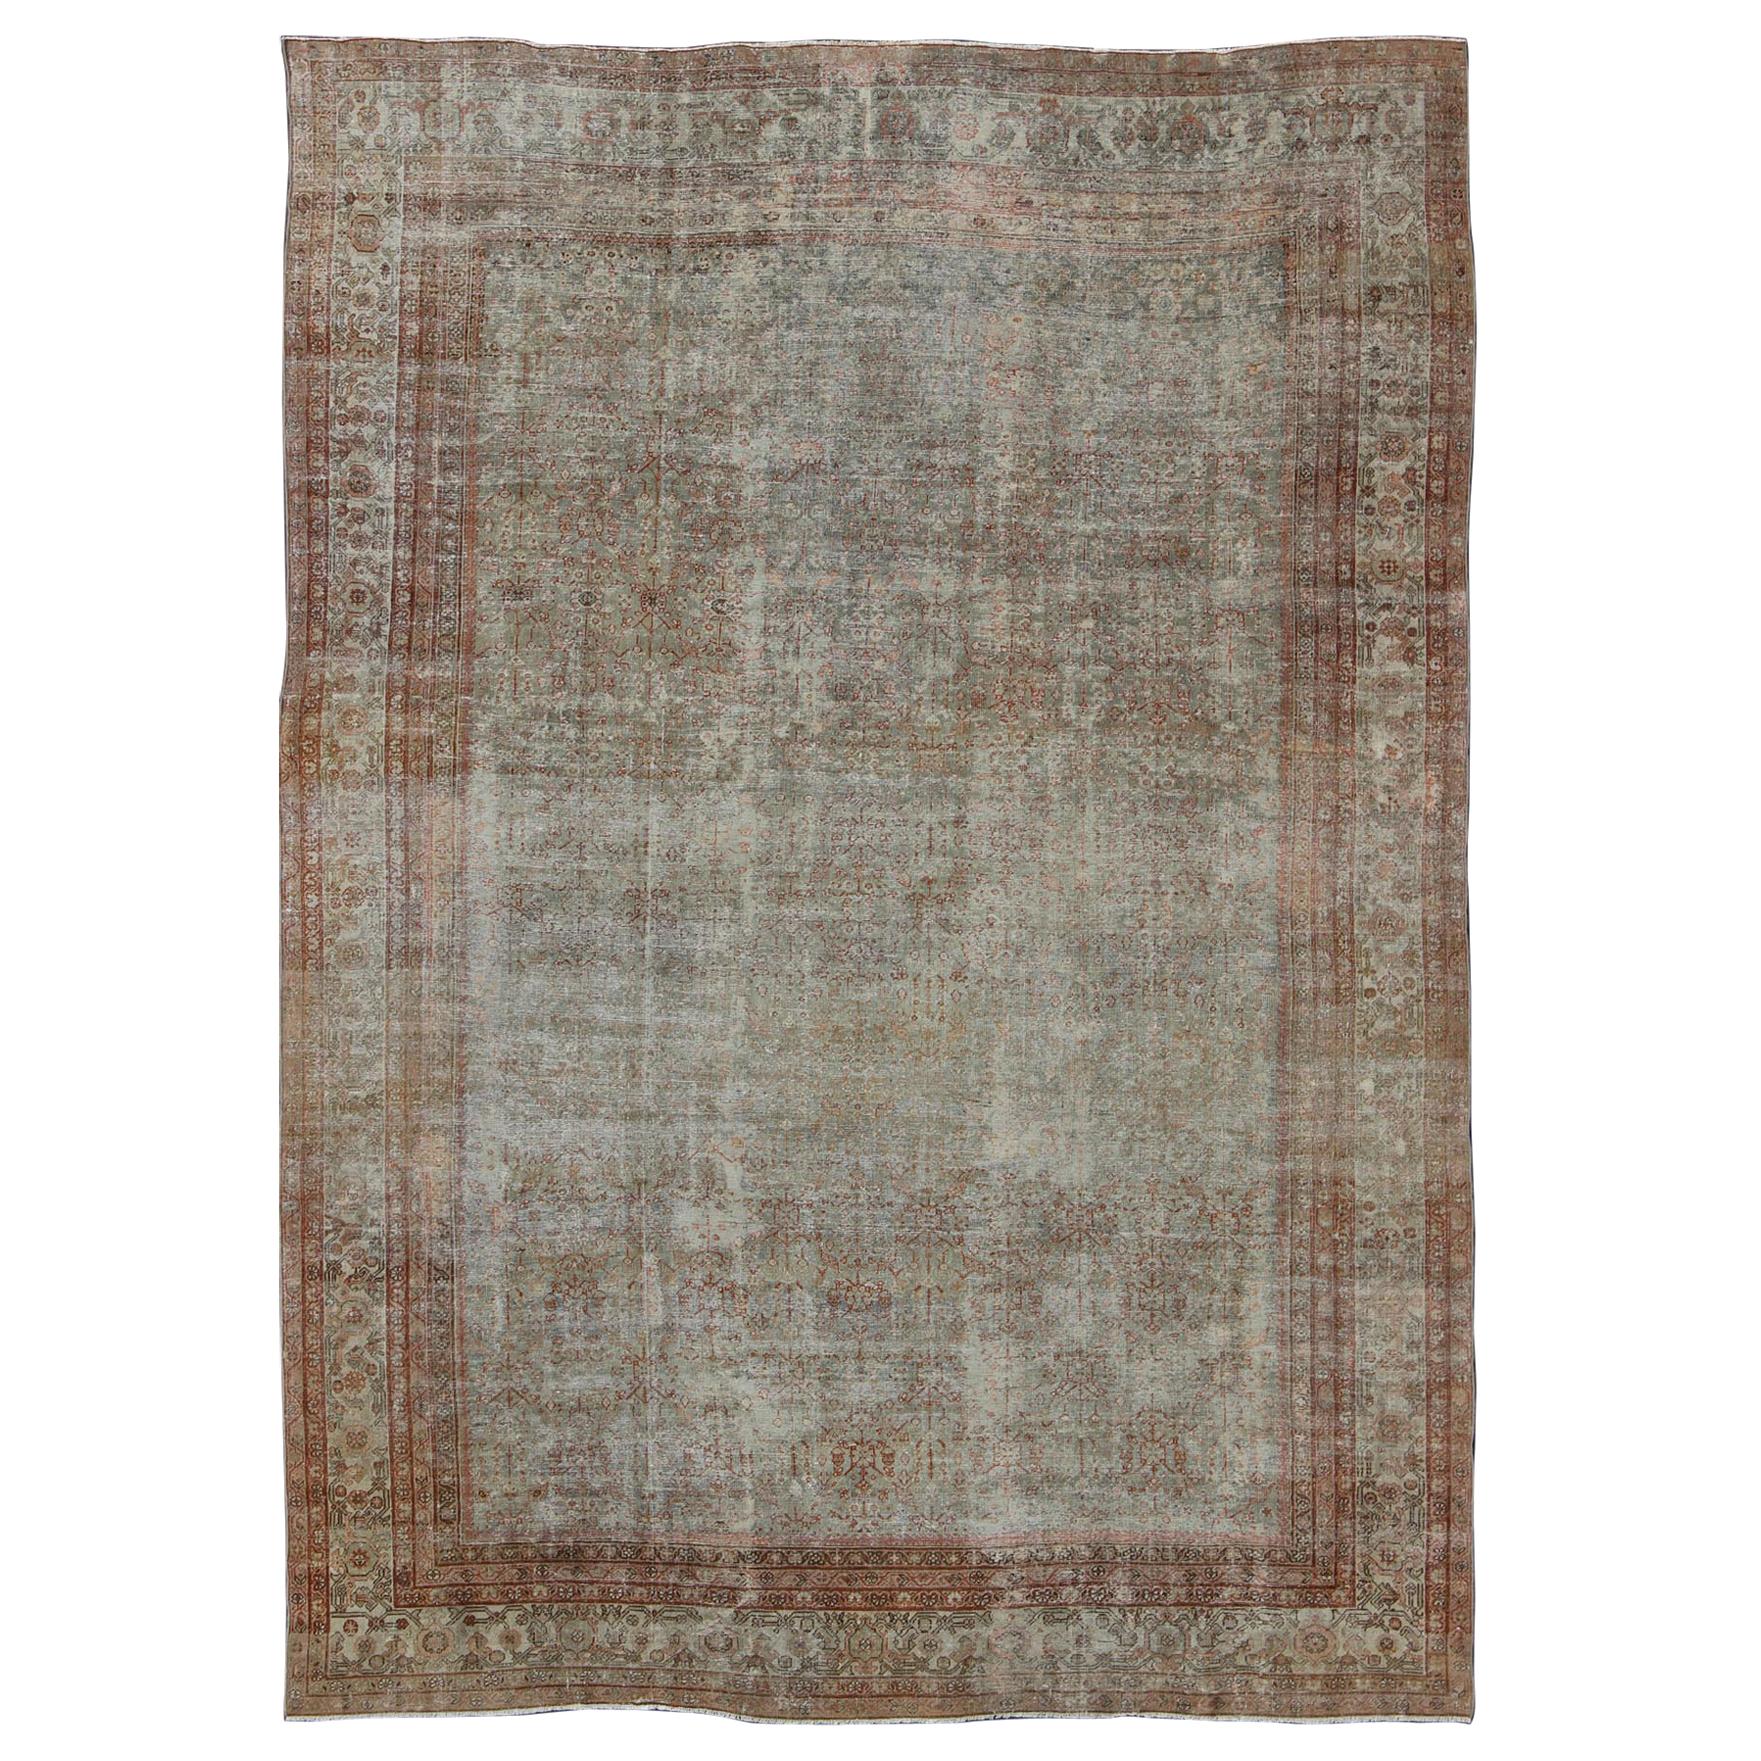 Antique Persian Distressed Sultanabad Rug with Subdued All-Over Design in Green